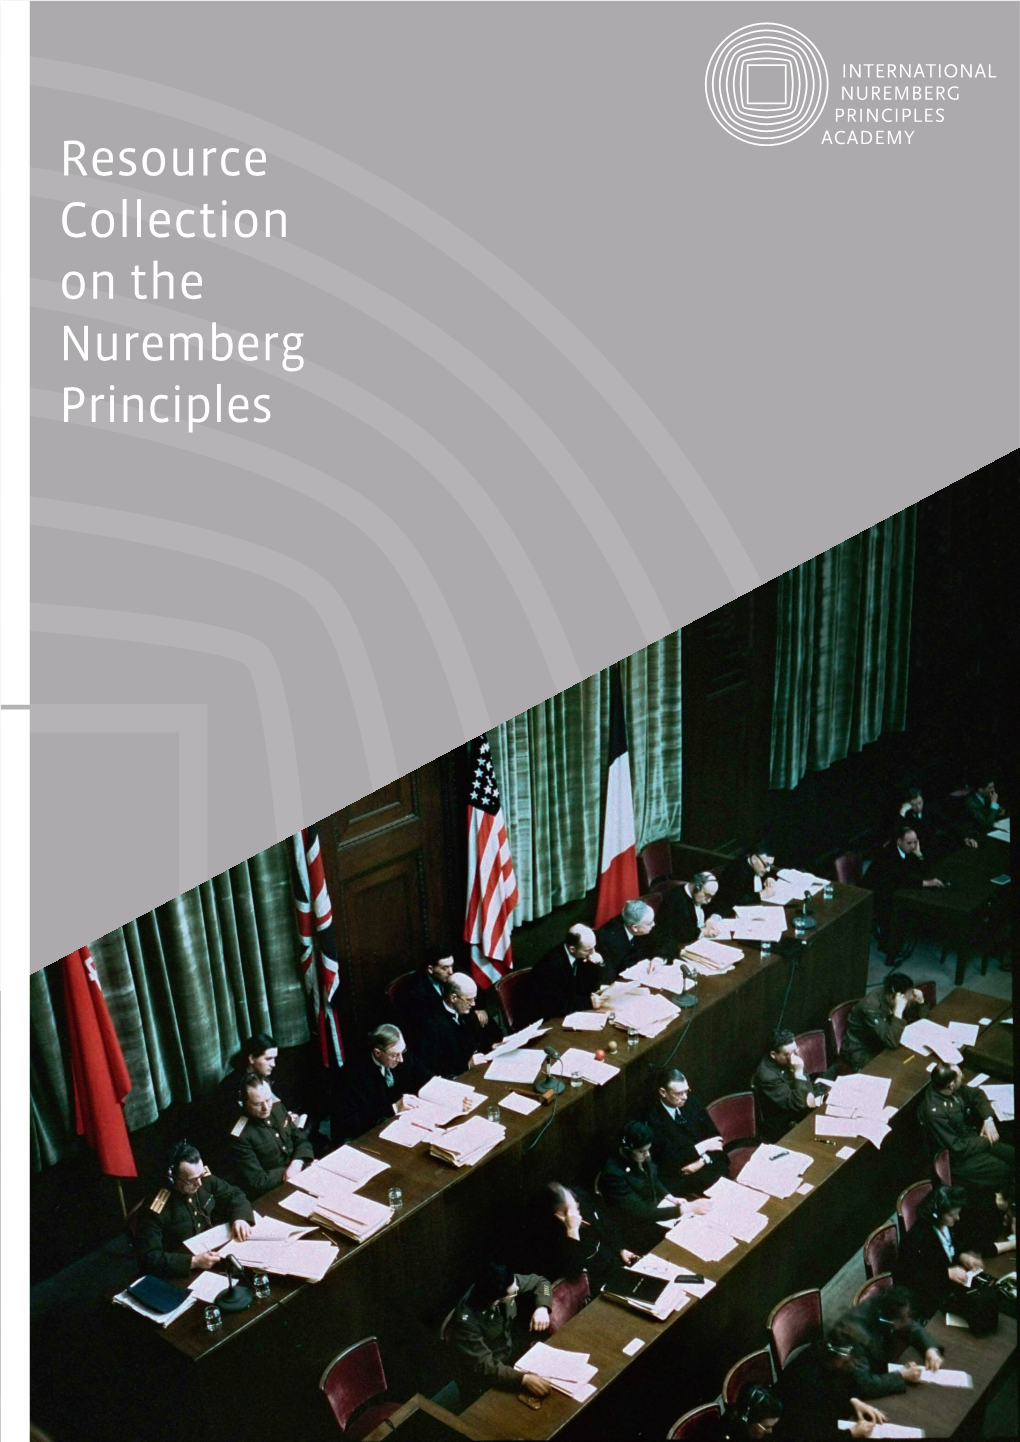 Resource Collection on the Nuremberg Principles the International Nuremberg Principles Academy